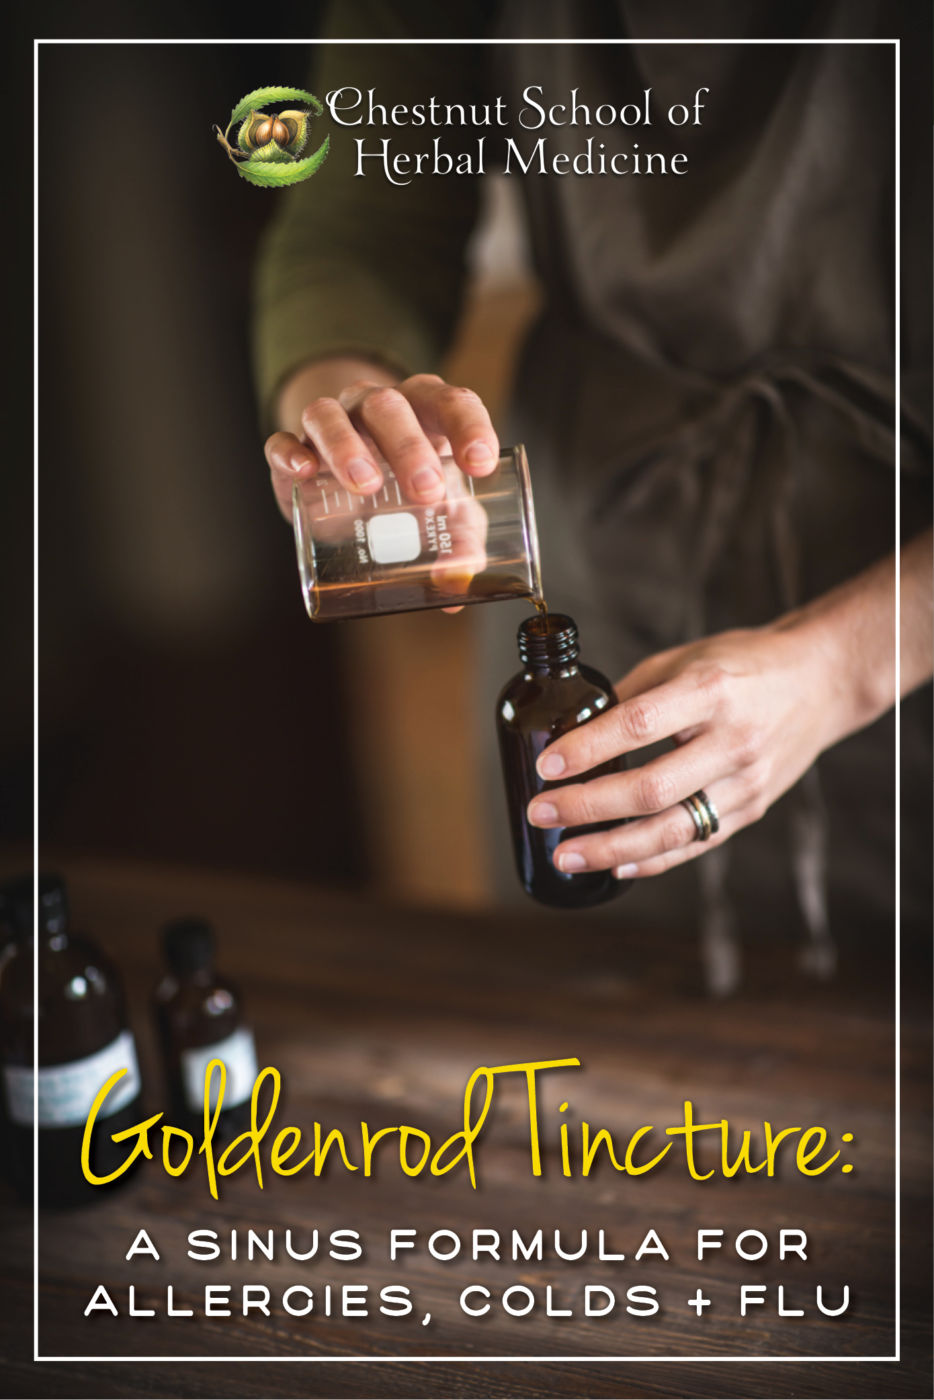 Goldenrod Tincture - A Sinus Formula for Allergies, Colds, and Flu.